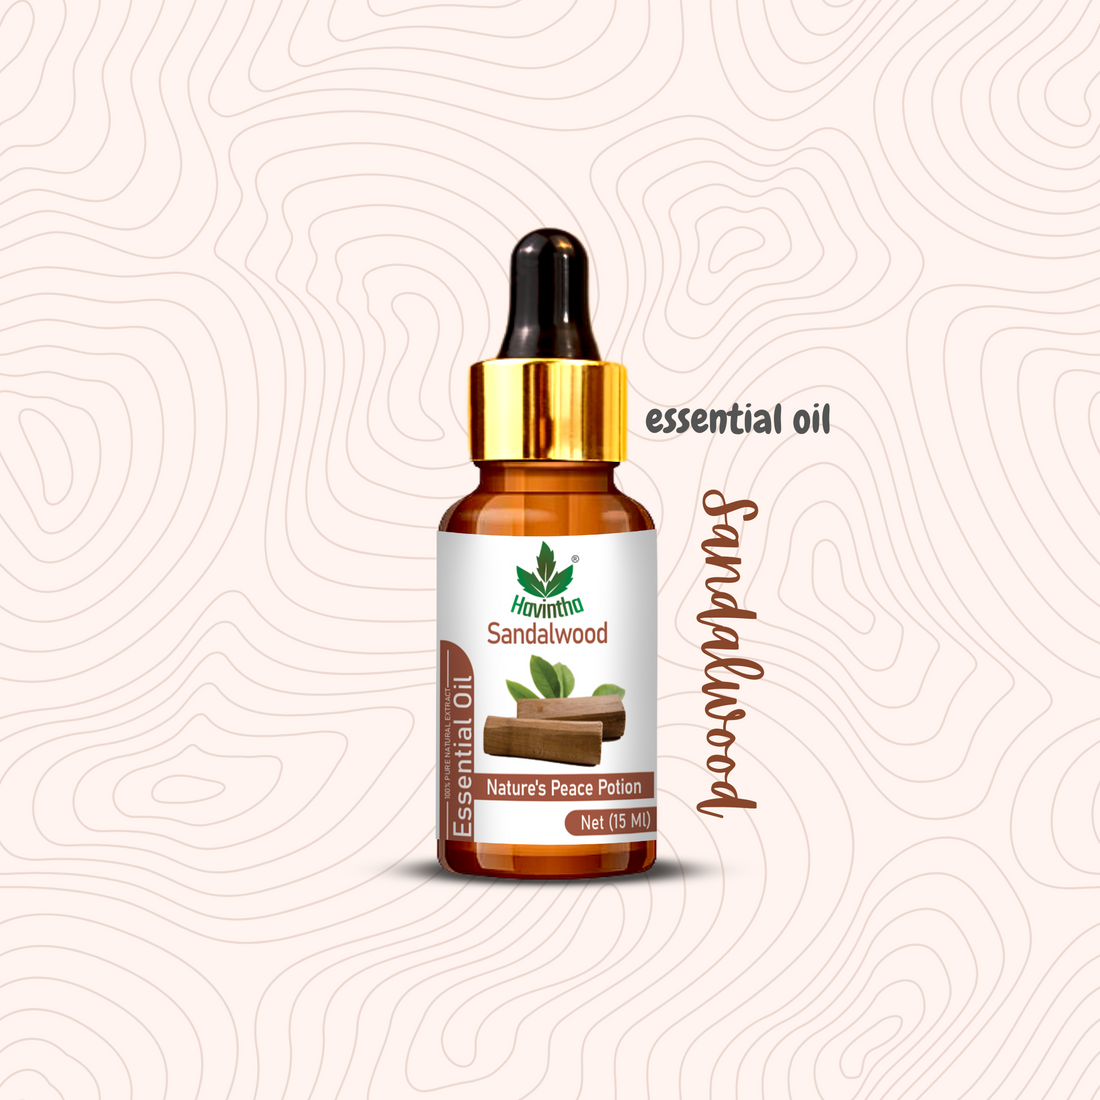 Havintha Sandalwood Essential Oil For Stress Reduction, Hair Care, Skin Care and Mental Alertness | Pure Aroma - 15 ml.